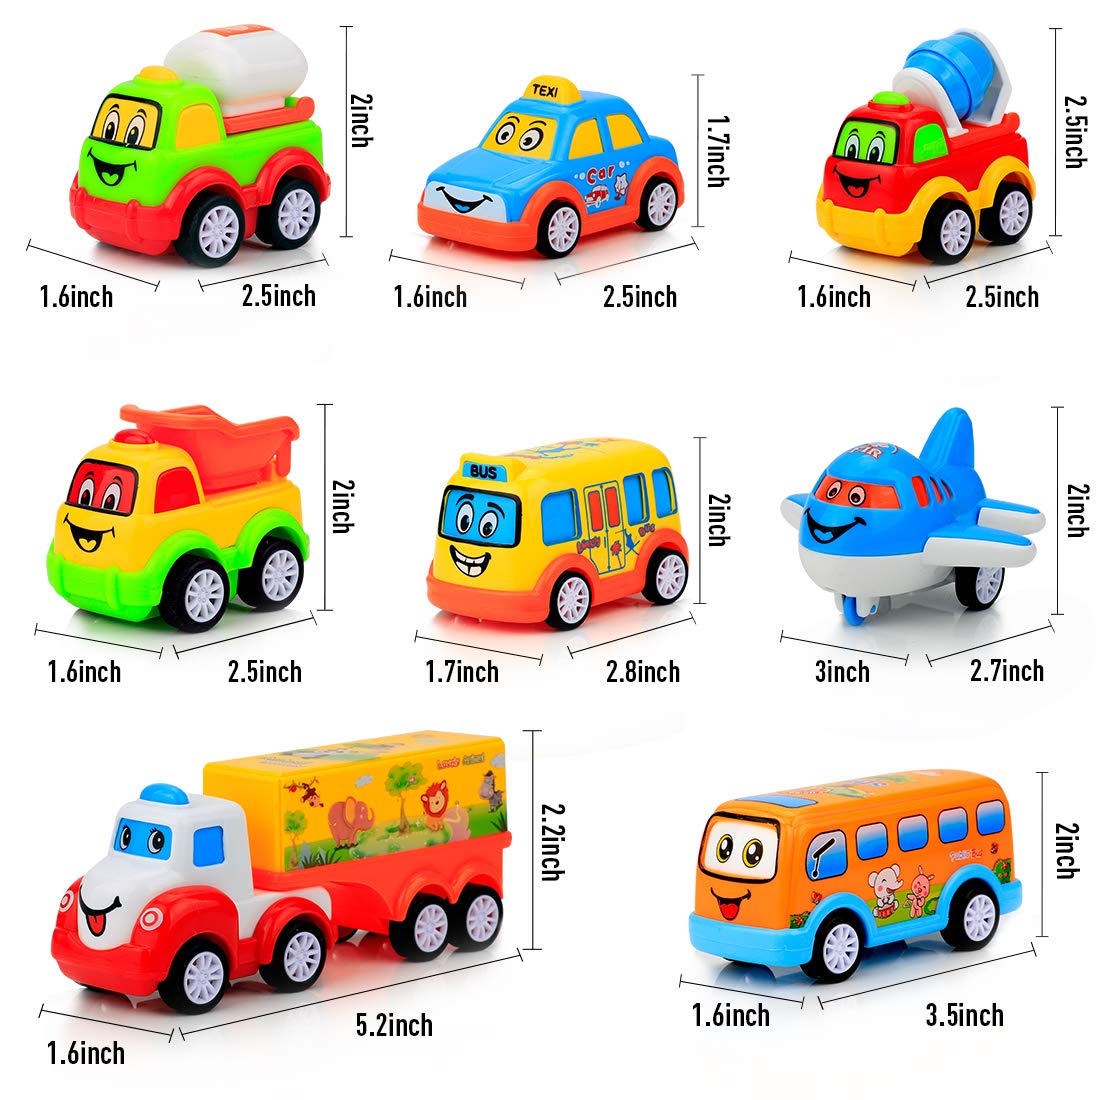 9 pcs Cars Toys for 2 3 4 5 Years Old Toddlers, Big Carrier Truck with 8 Small Cartoon Pull Back Cars, Colorful Assorted Vehicles, Transport Truck with Sound and Light, Best Gift for Boy and Girl